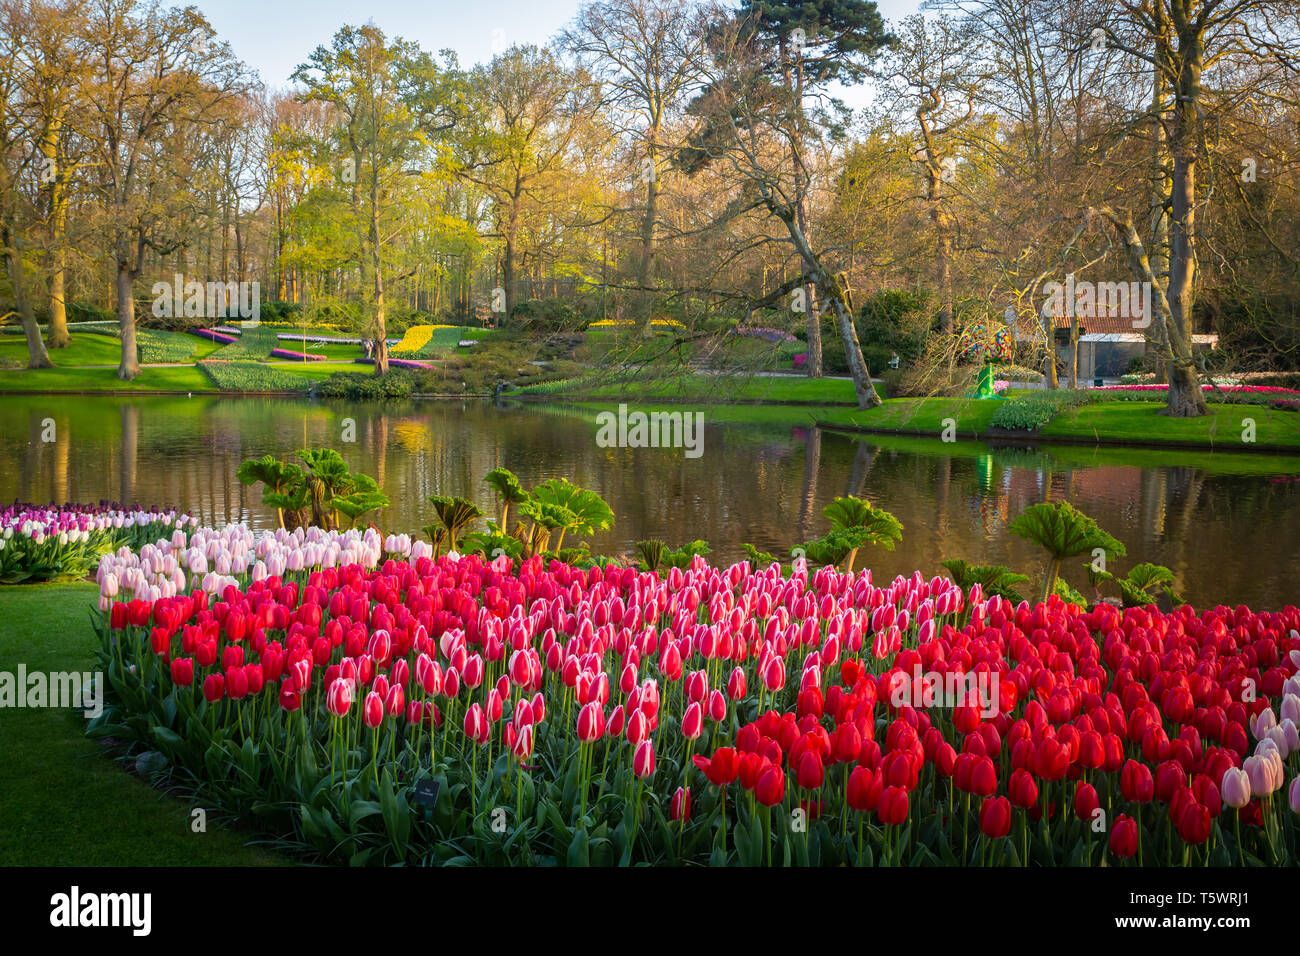 spring time tulips in Dutch tulip garden in The Netherlands Stock Photo